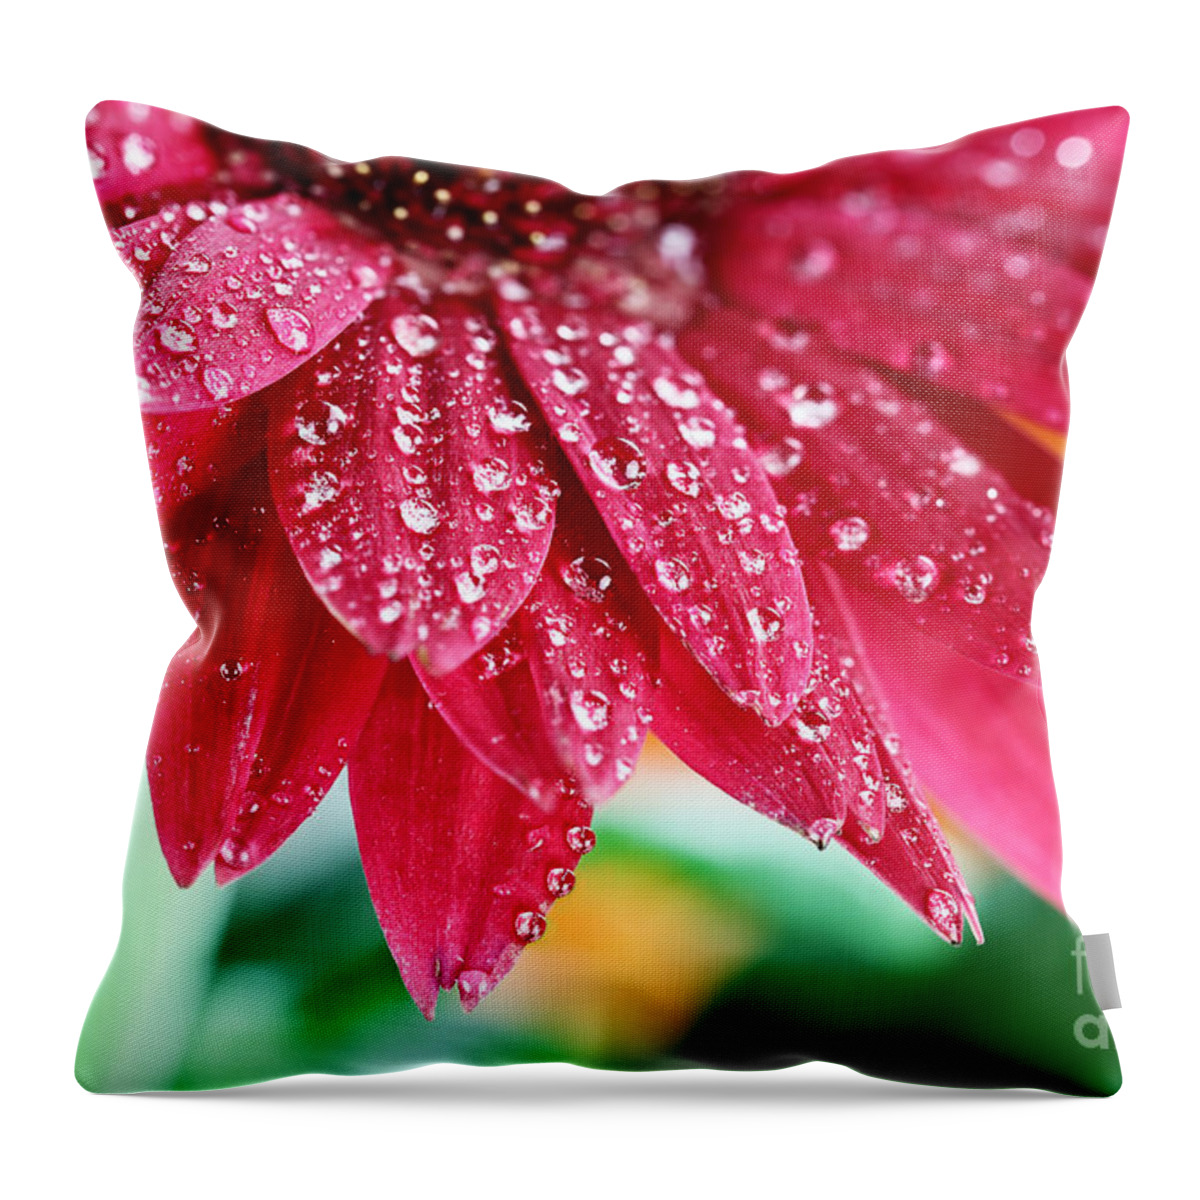 Gerbera Daisy Throw Pillow featuring the photograph After The Rain by Stephanie Frey